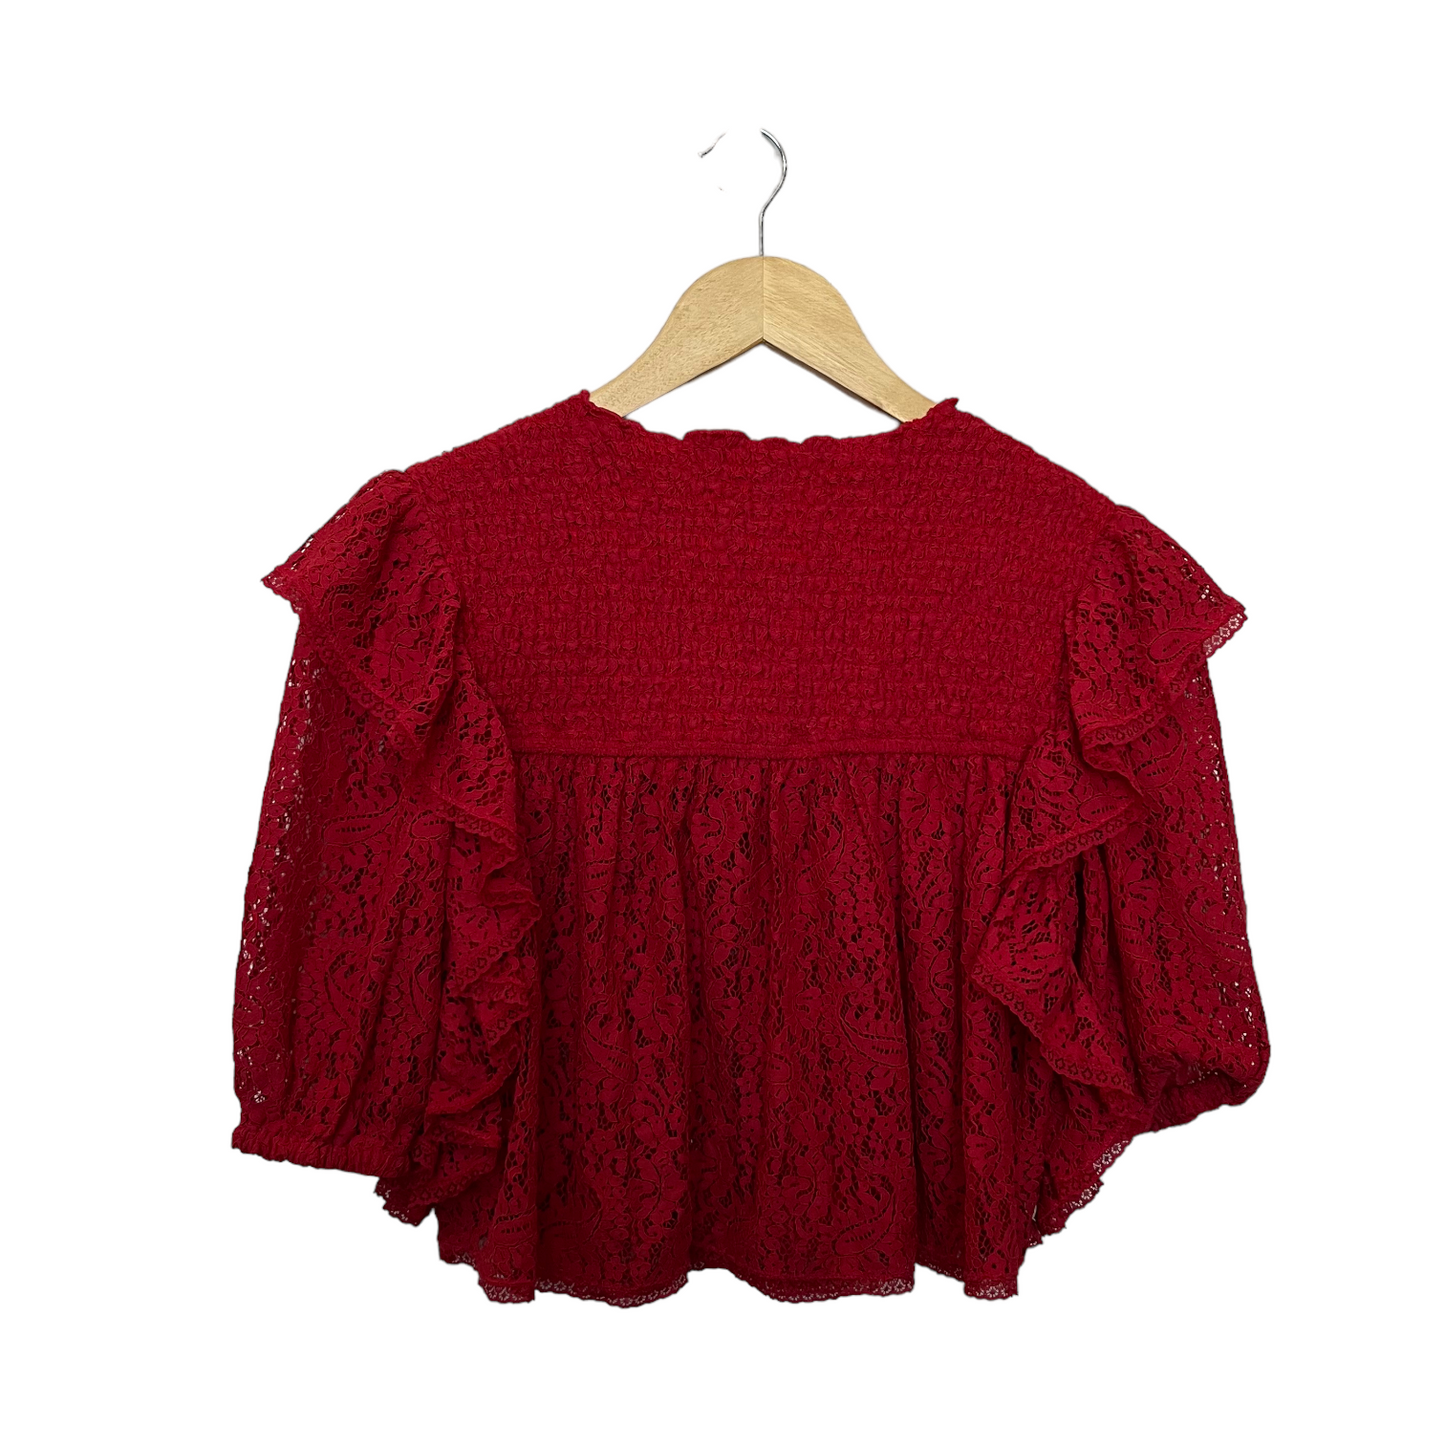 Tularosa Ashley Lace Top in Cherry Red